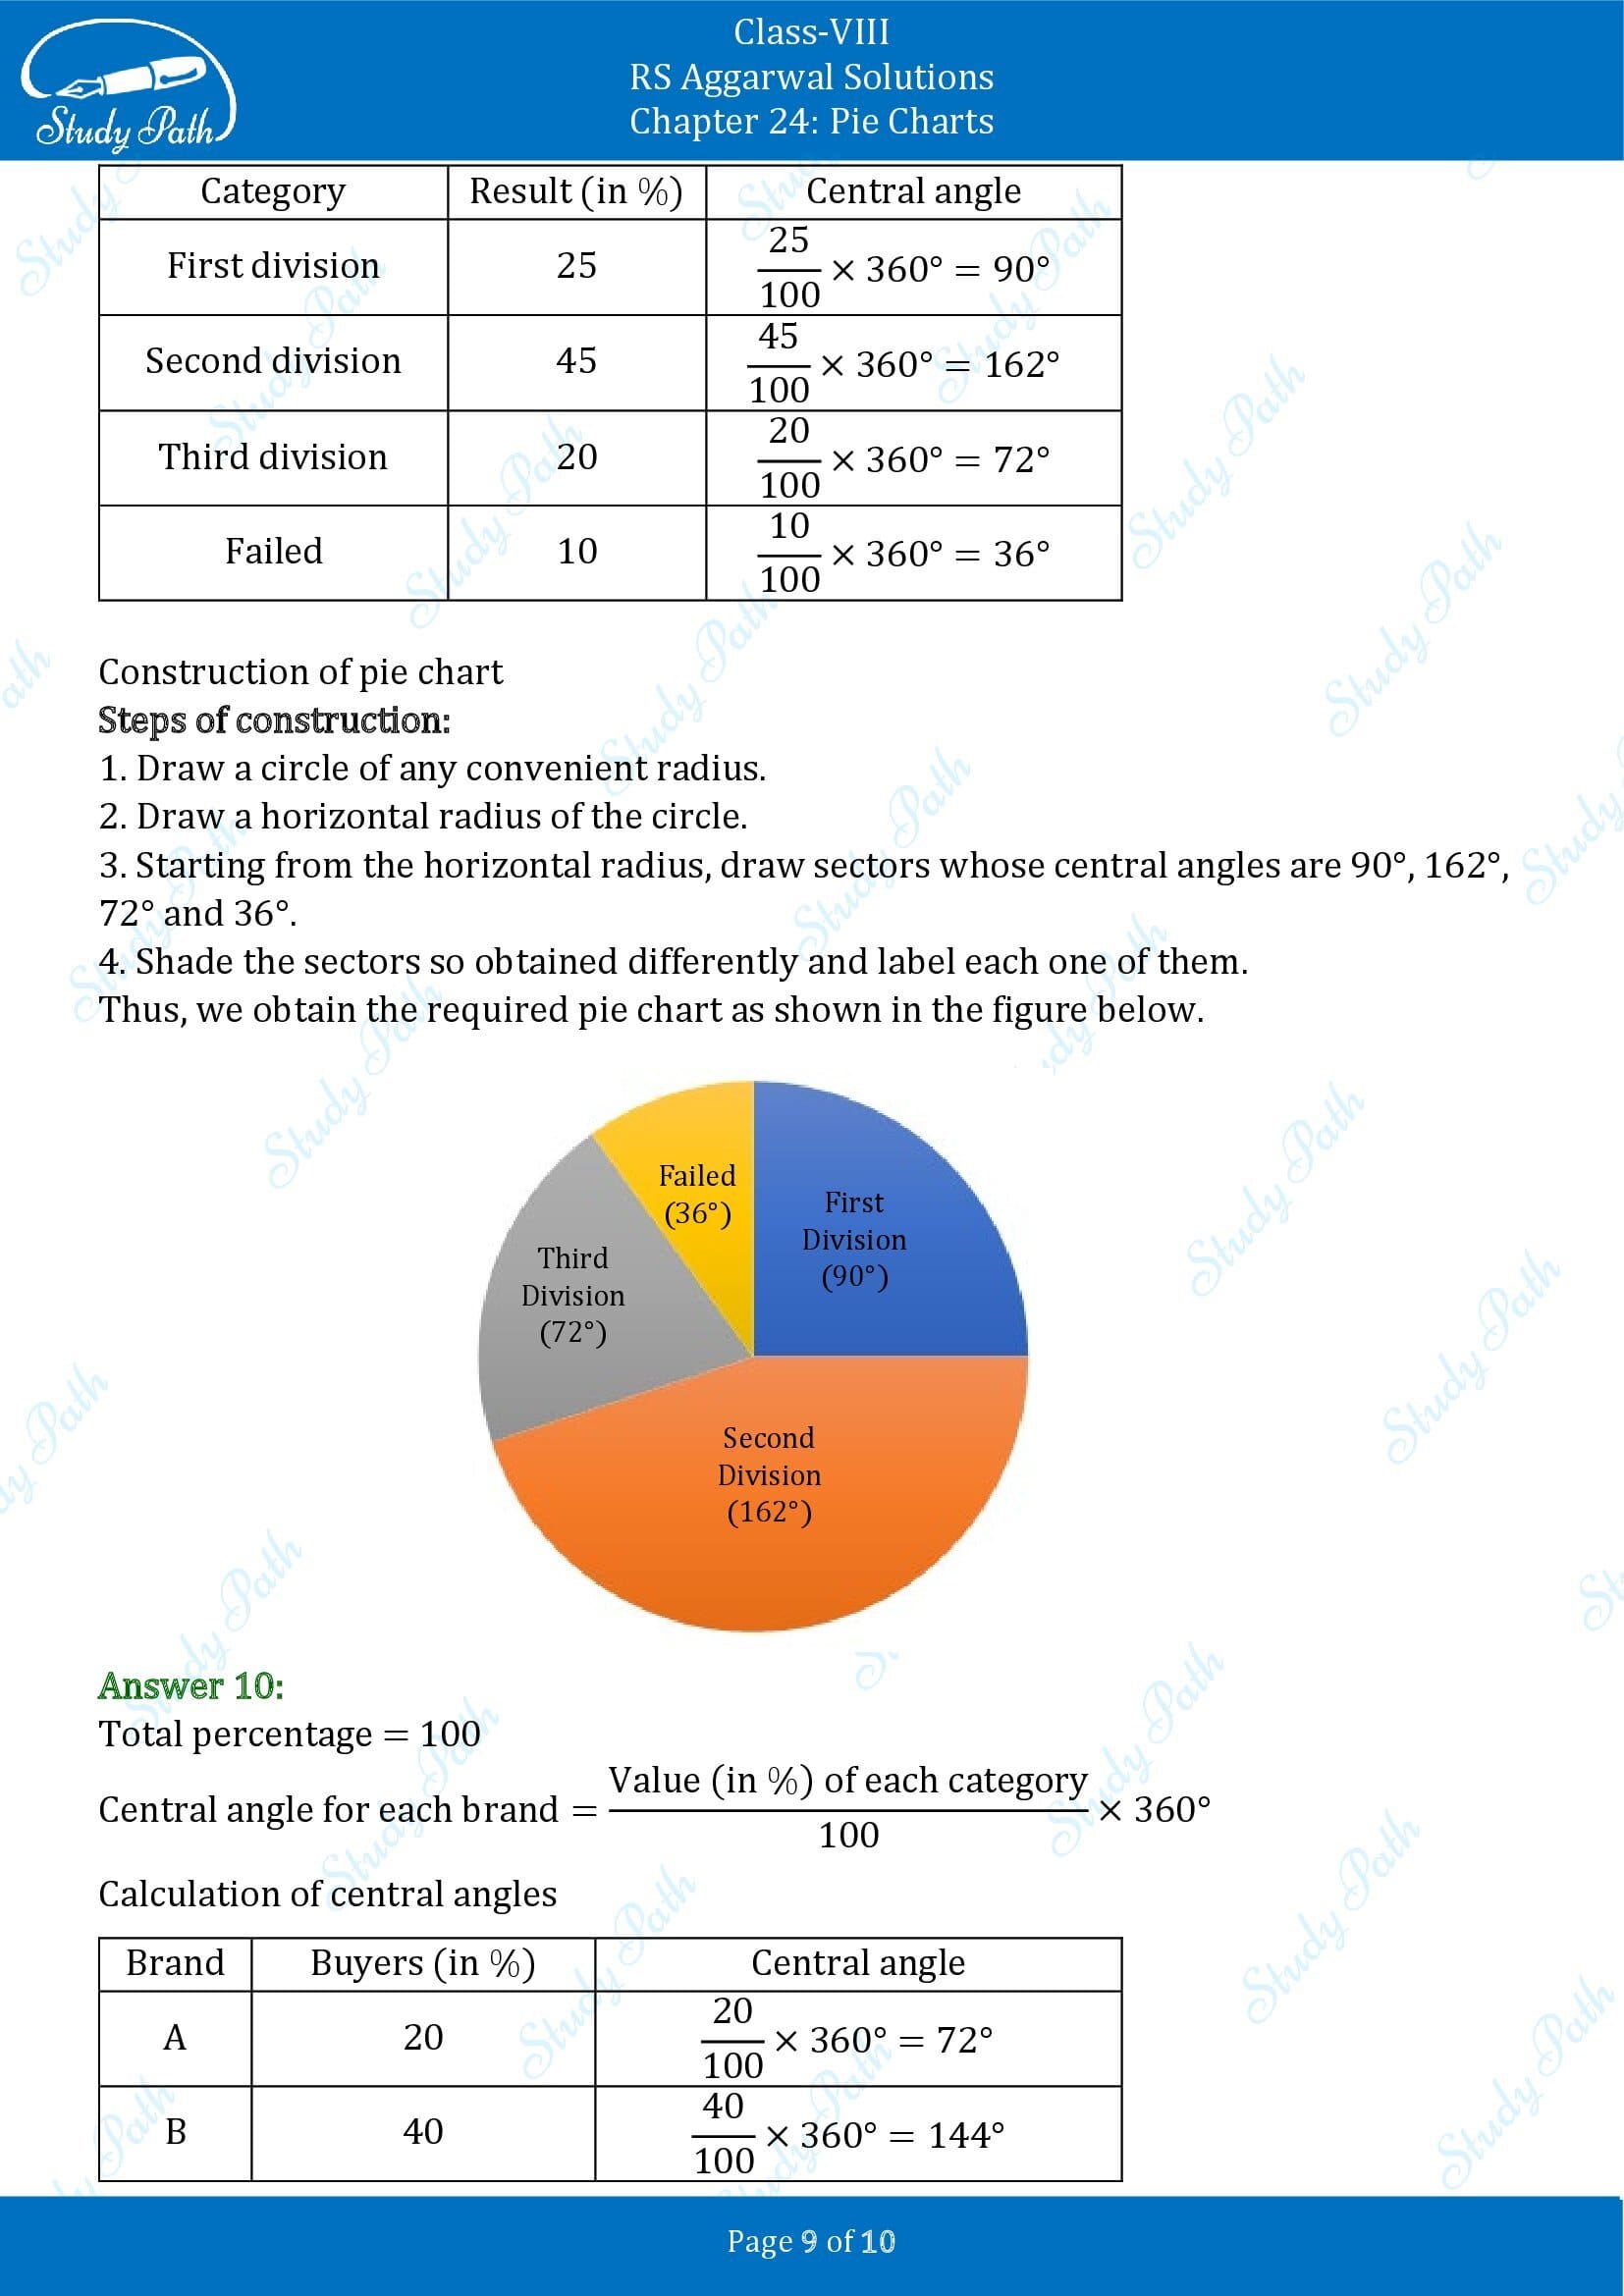 RS Aggarwal Solutions Class 8 Chapter 24 Pie Charts Exercise 24A 00009